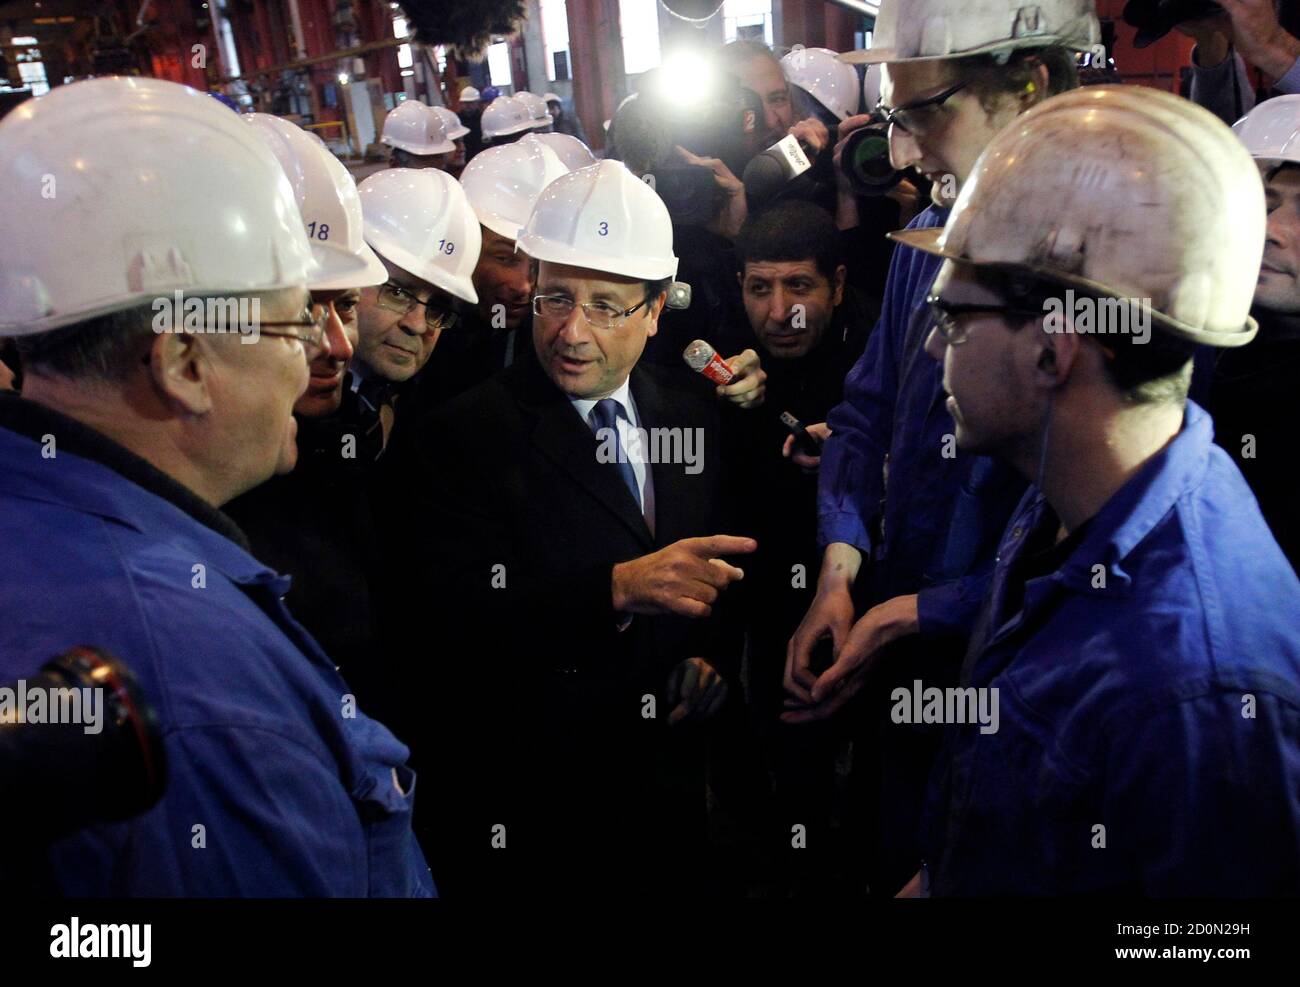 Francois Hollande (C), Socialist Party candidate for the 2012 French presidential election, speaks with steel workers as he visits Akers, a steel factory, in Thionville, eastern France, January 17, 2012.    REUTERS/Christophe Ena/Pool   (FRANCE - Tags: POLITICS BUSINESS EMPLOYMENT) Stock Photo